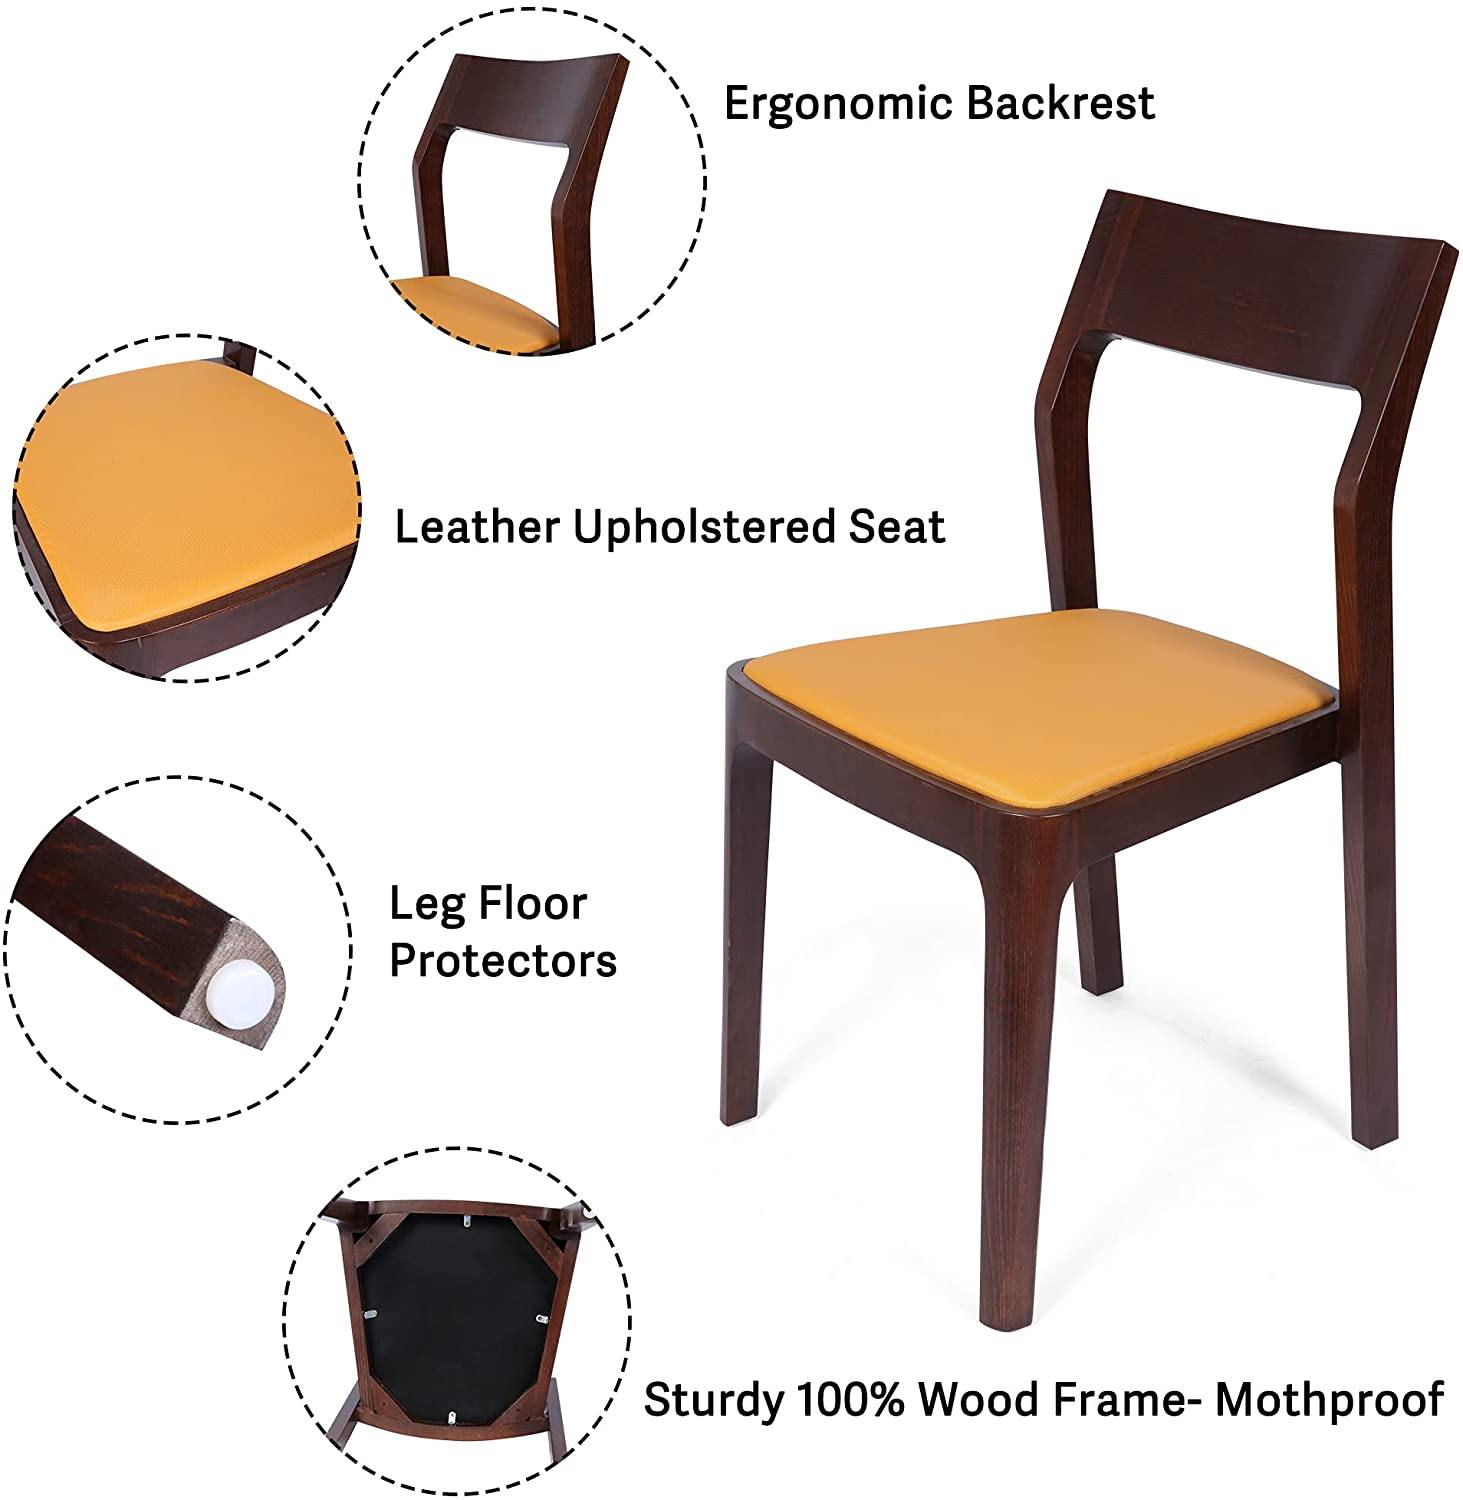 Set of 2 Dining Chair Mid Century Leather and Wood Chair for Living Room Kitchen Bedroom, High-end Modern Armless Accent Chair - Bosonshop